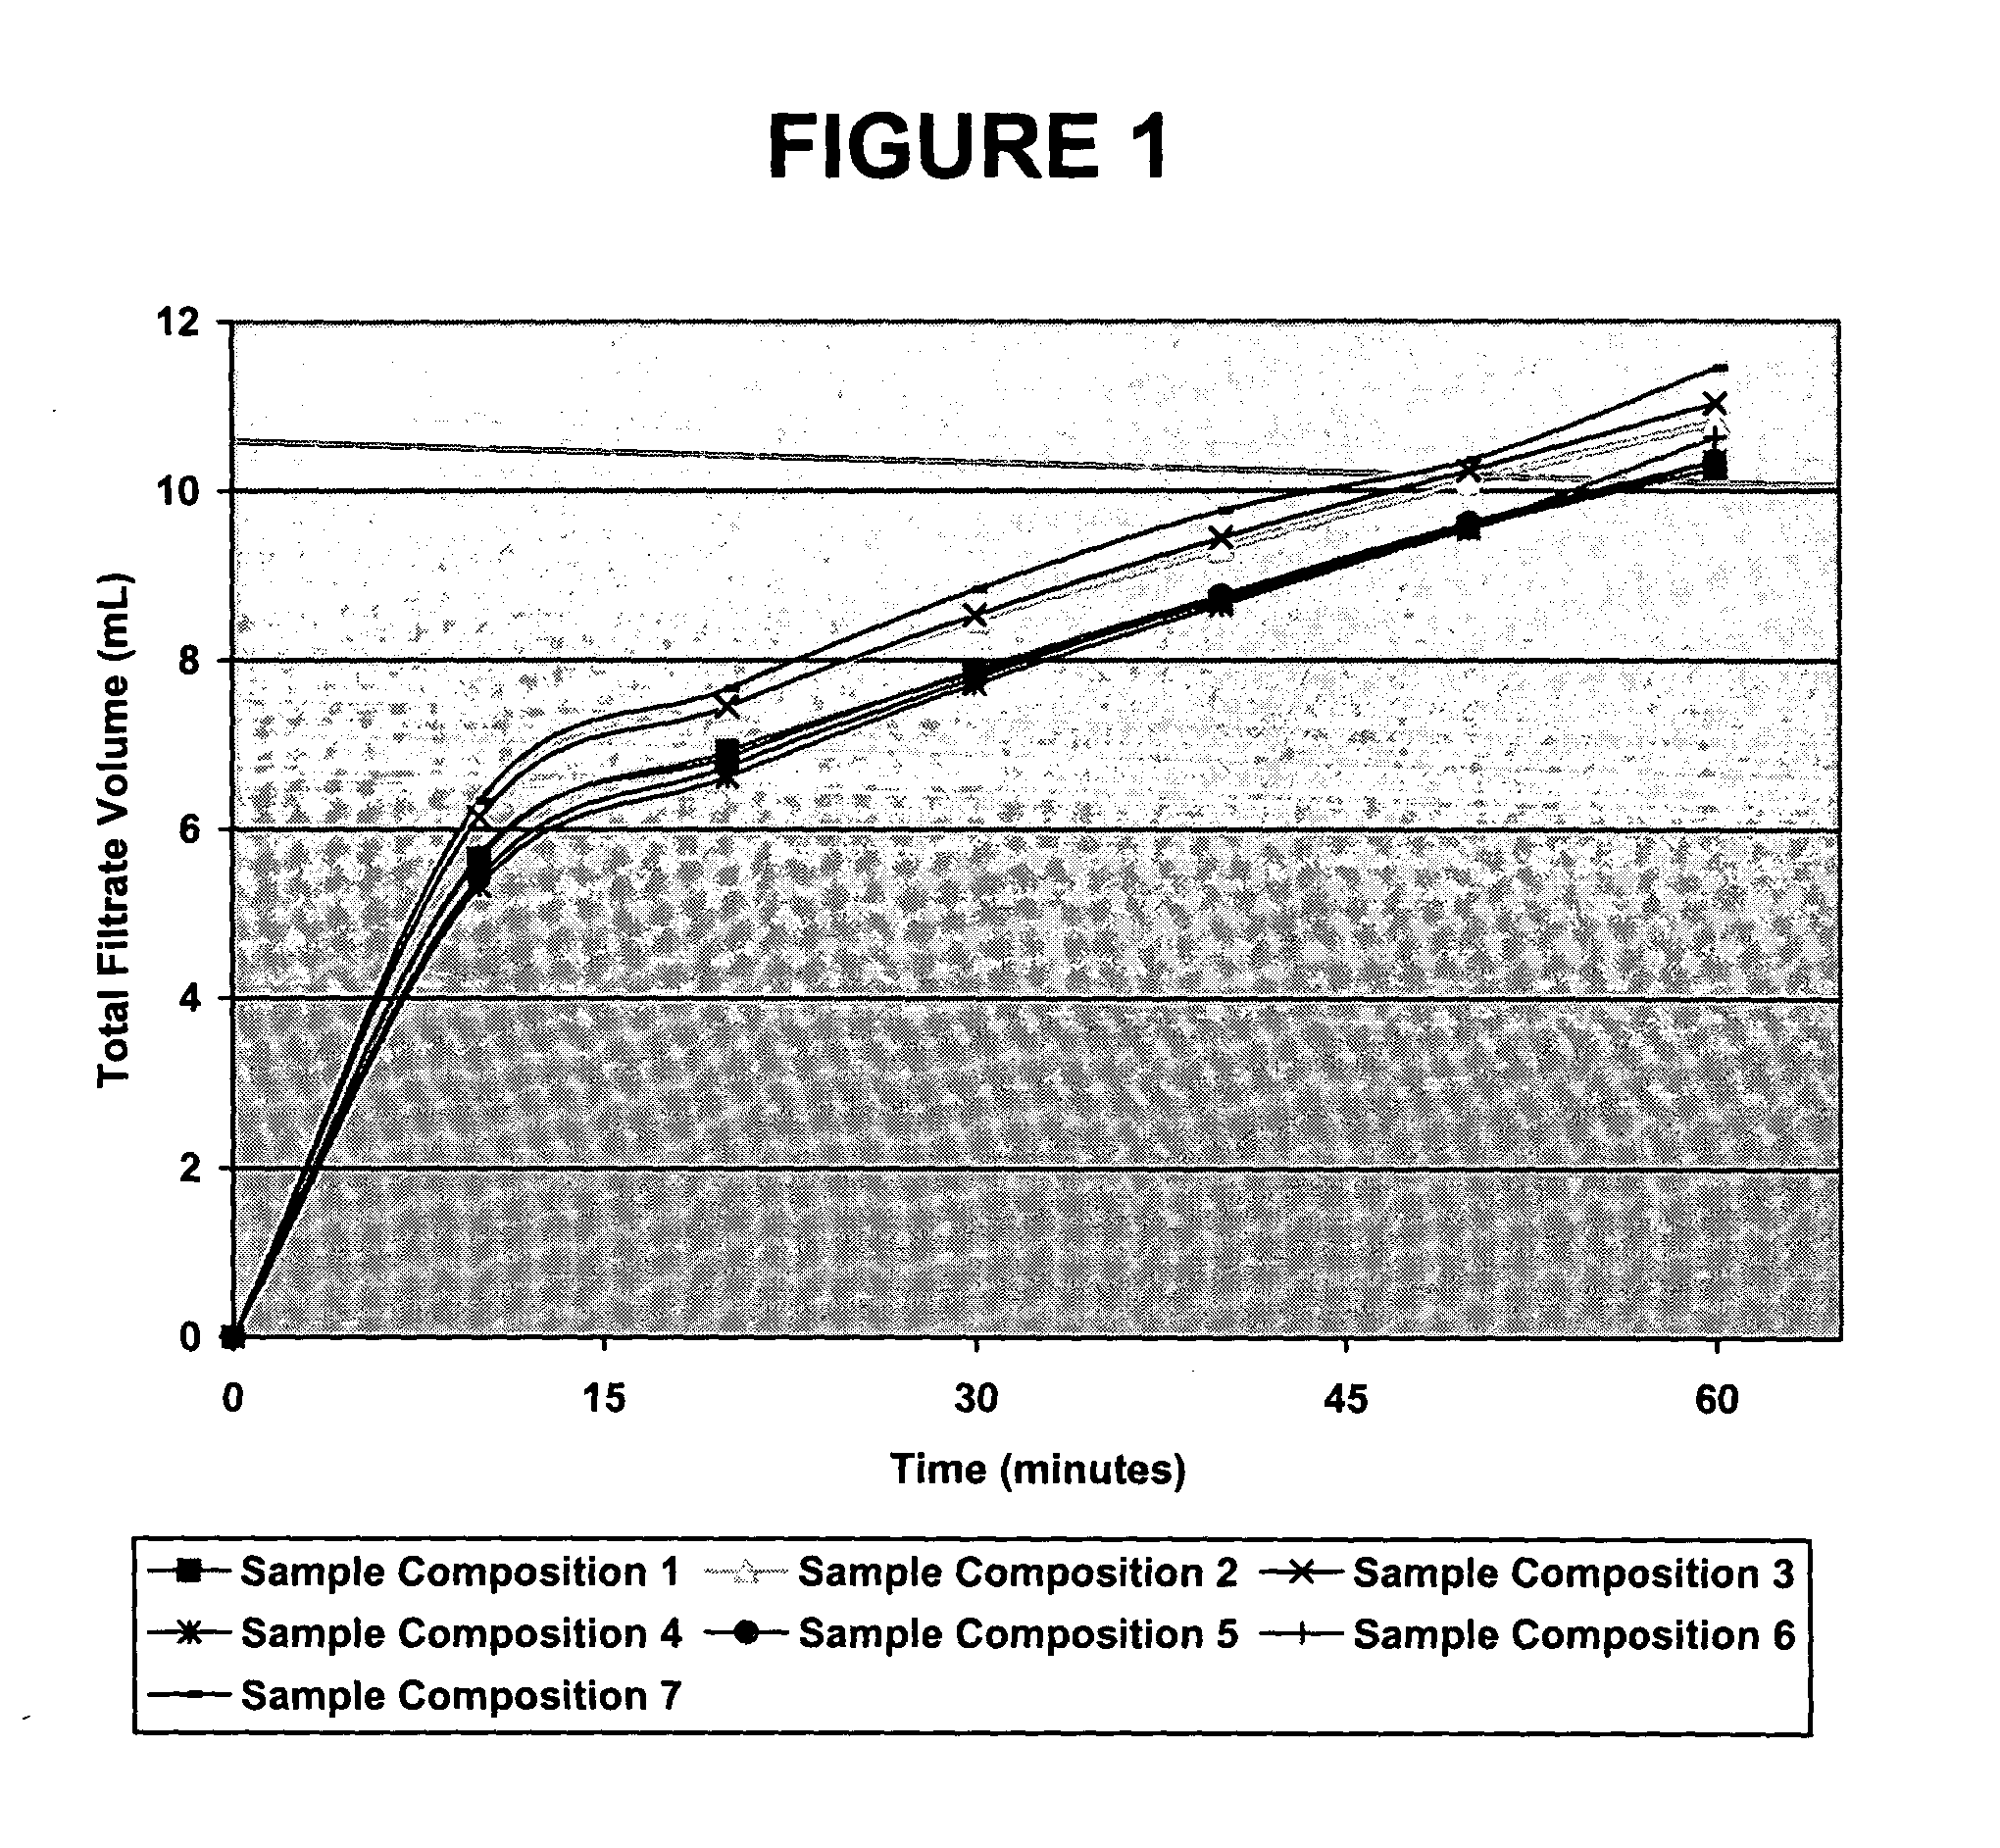 Subterranean treatment fluids and methods of treating subterranean formations